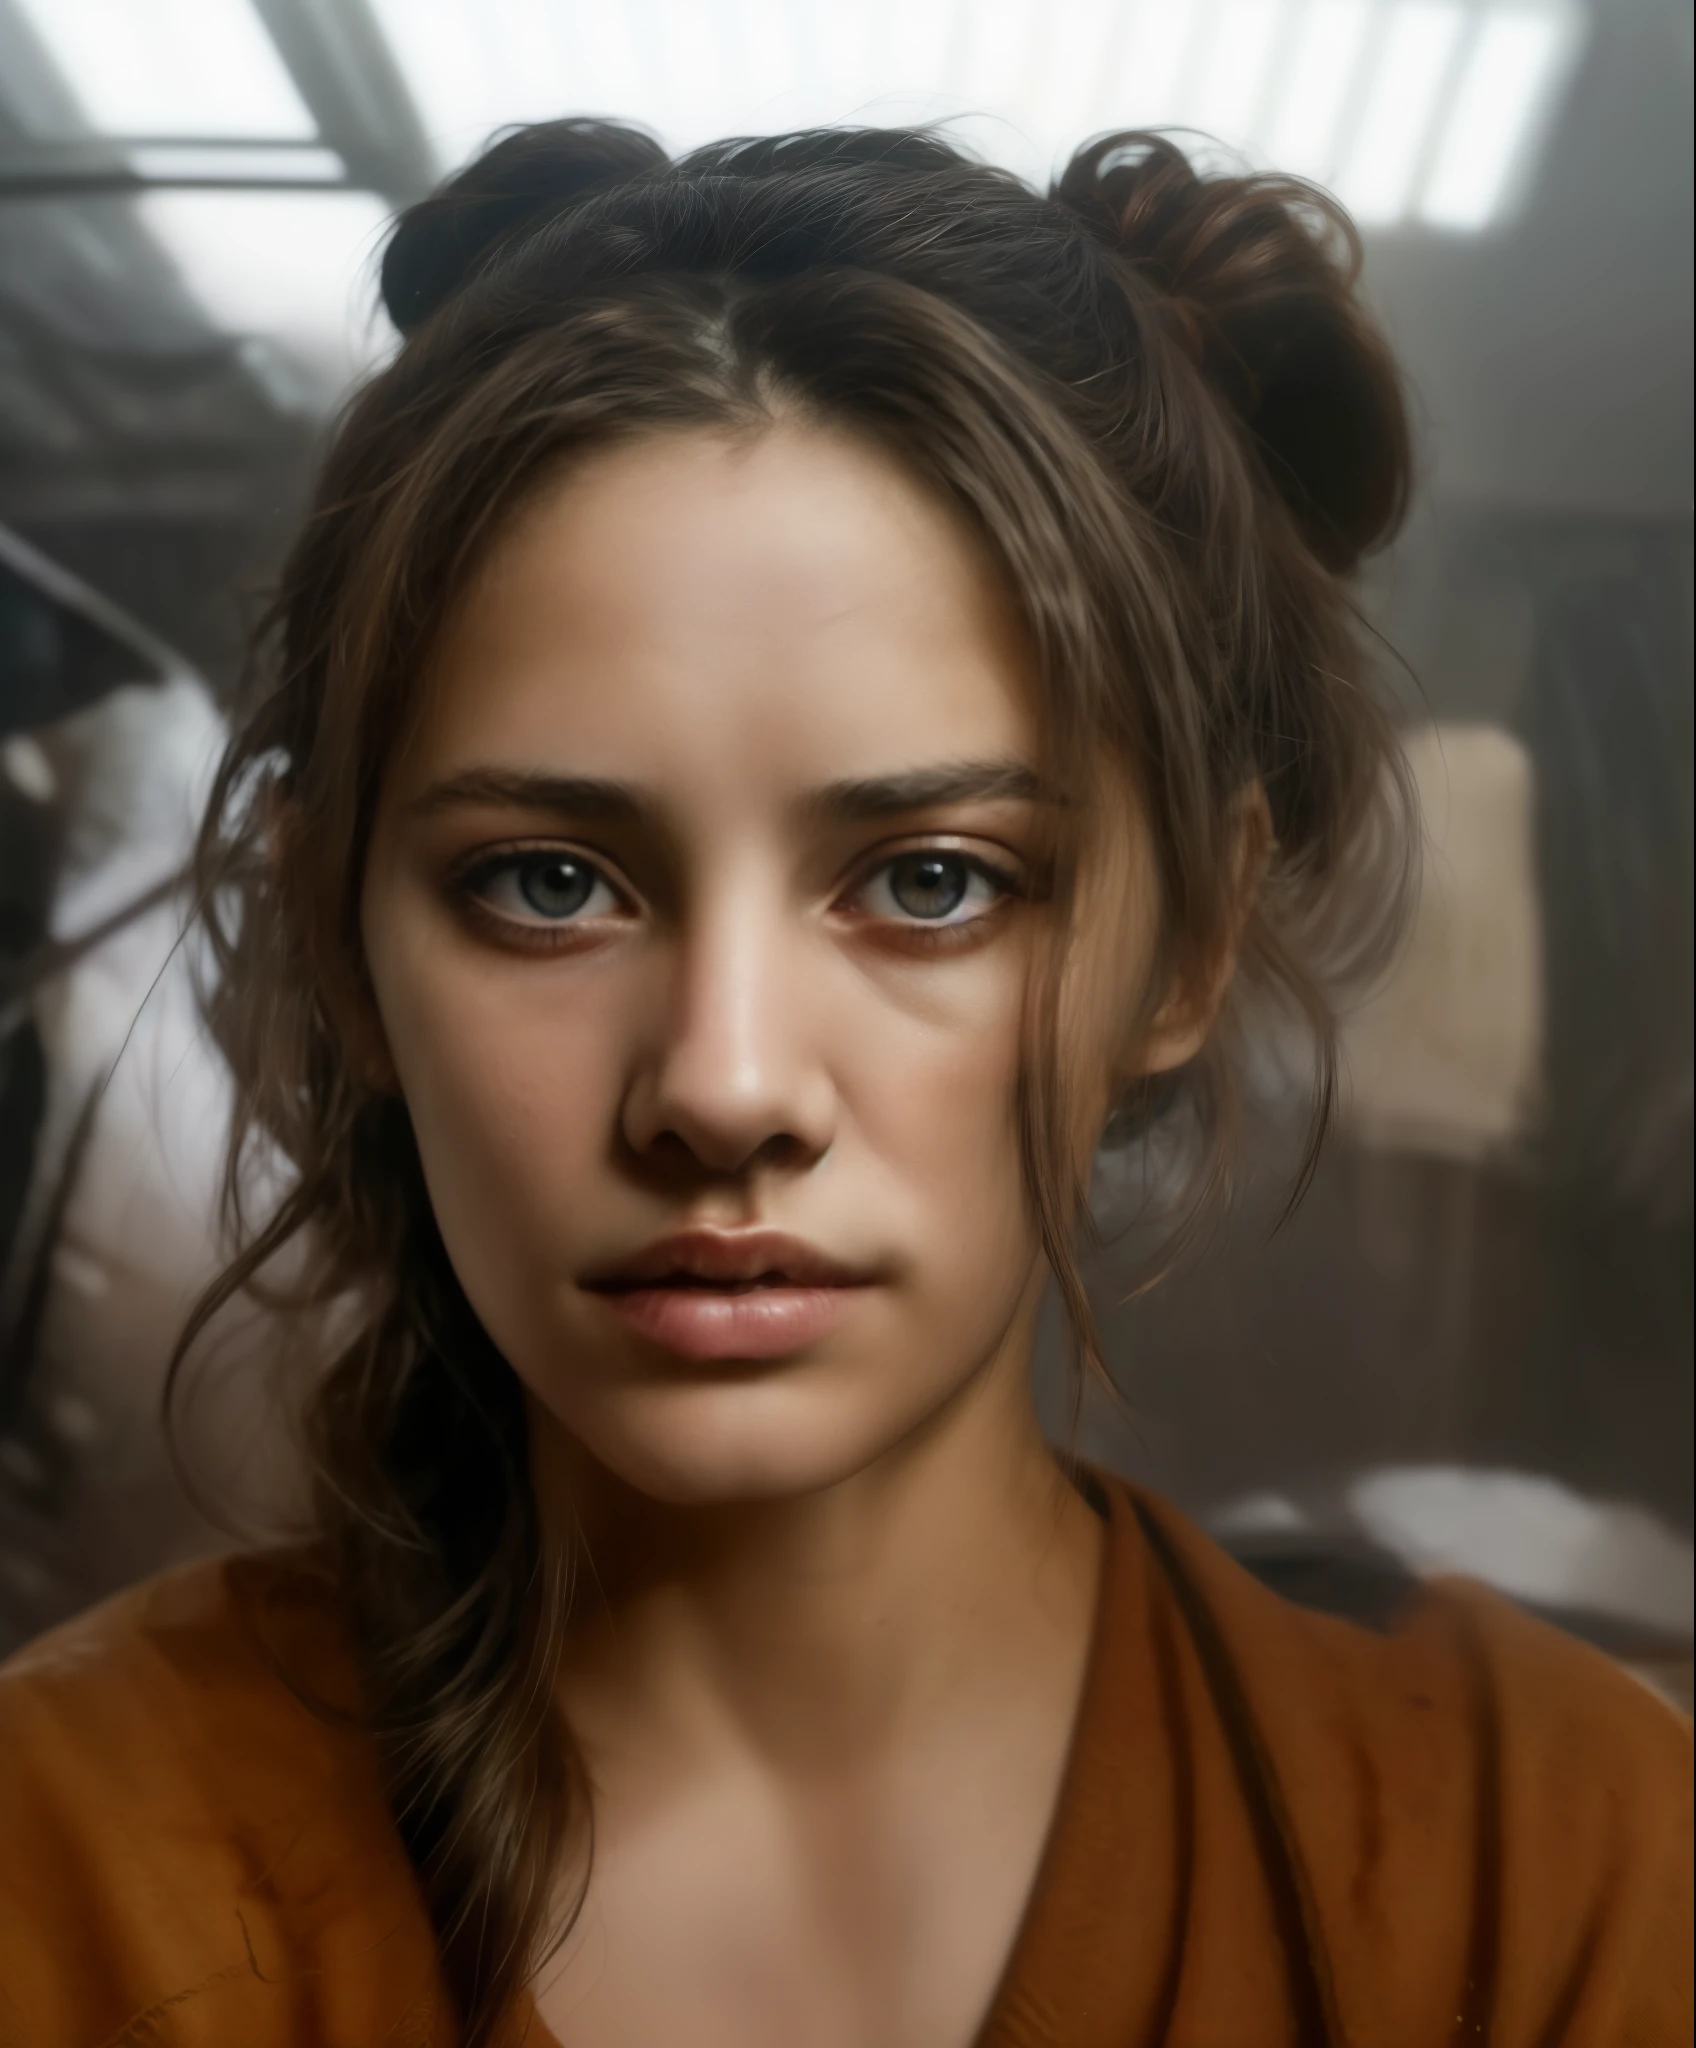 Ultra realistic portrait of a pretty woman, brown eyes, 44 years old, worried face, disheveled ponytail and bangs, messy clothes, character design concept art, reflected lights, light reflections, 3D octane render, detailed, emotional lighting, by Rafael Grassetti and Ian Spriggs, 4k resolution.